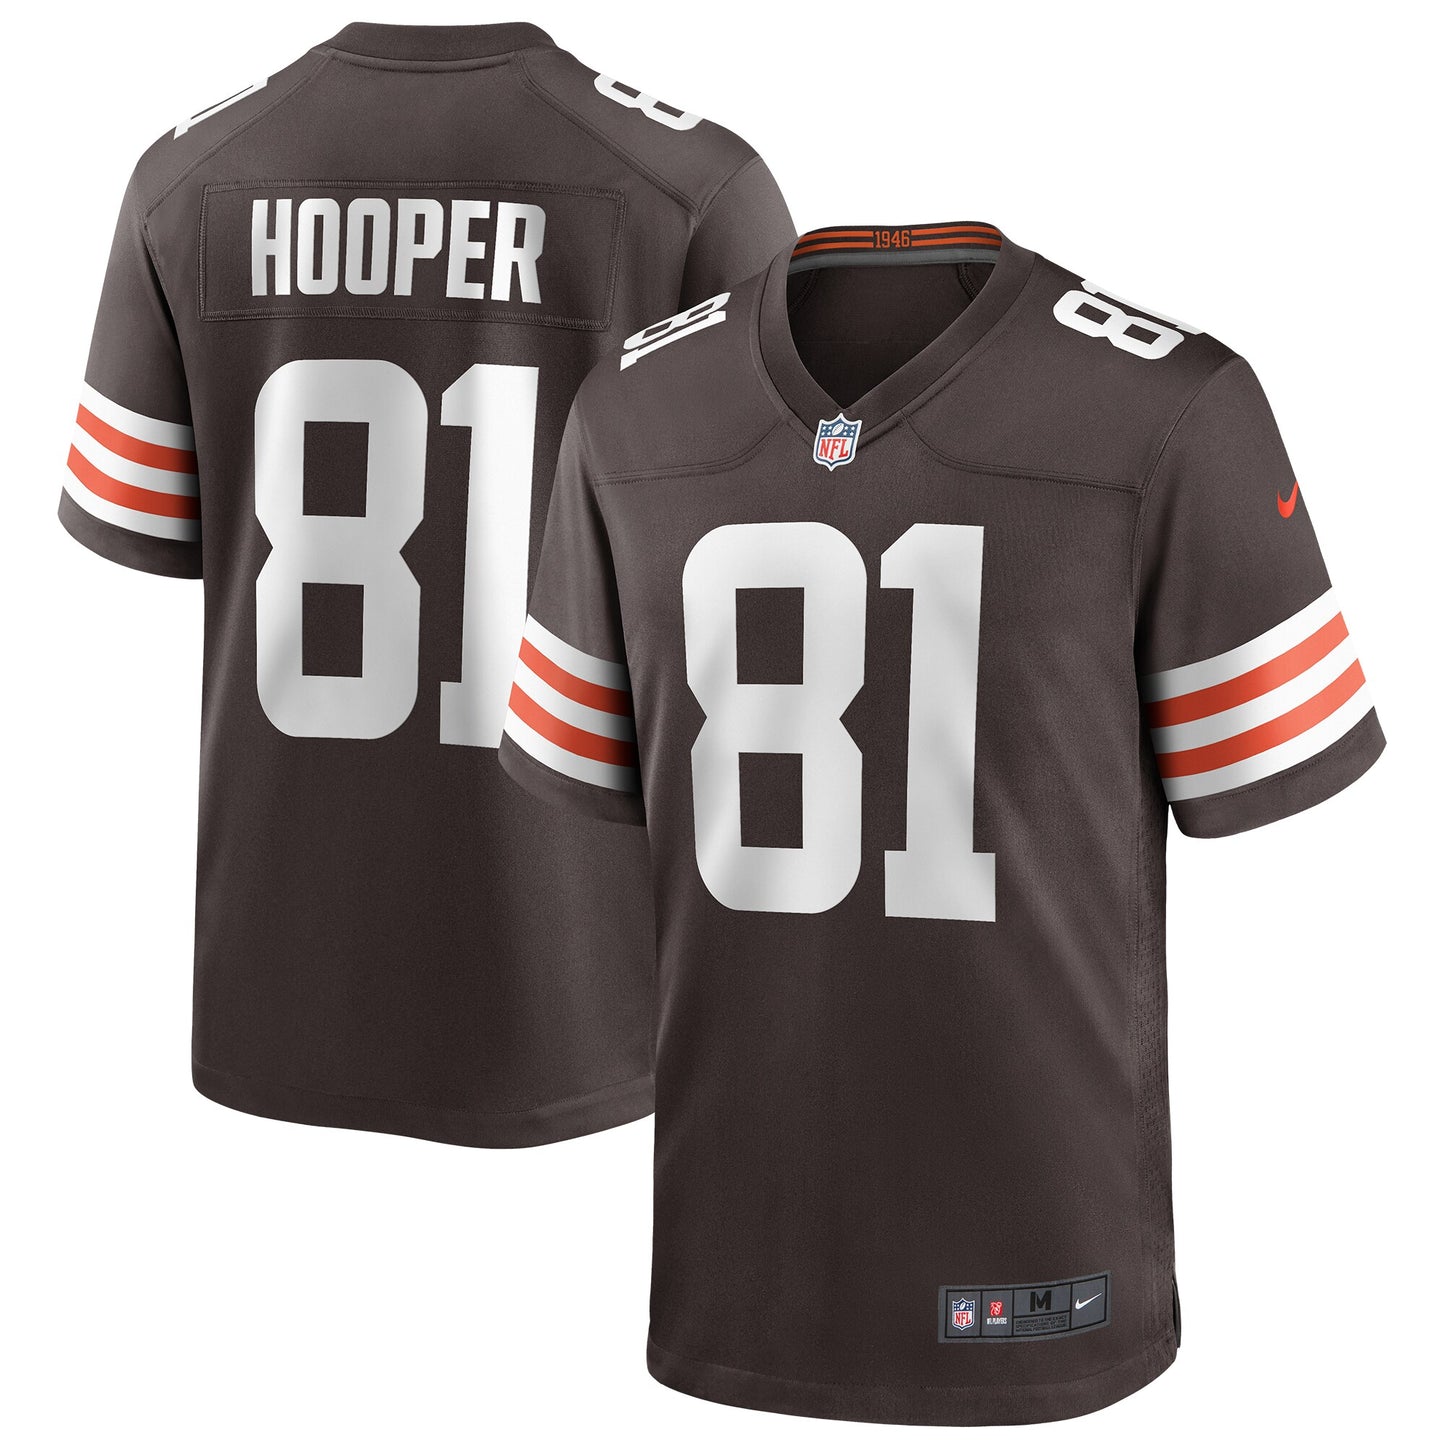 Austin Hooper Cleveland Browns Nike Game Jersey - Brown